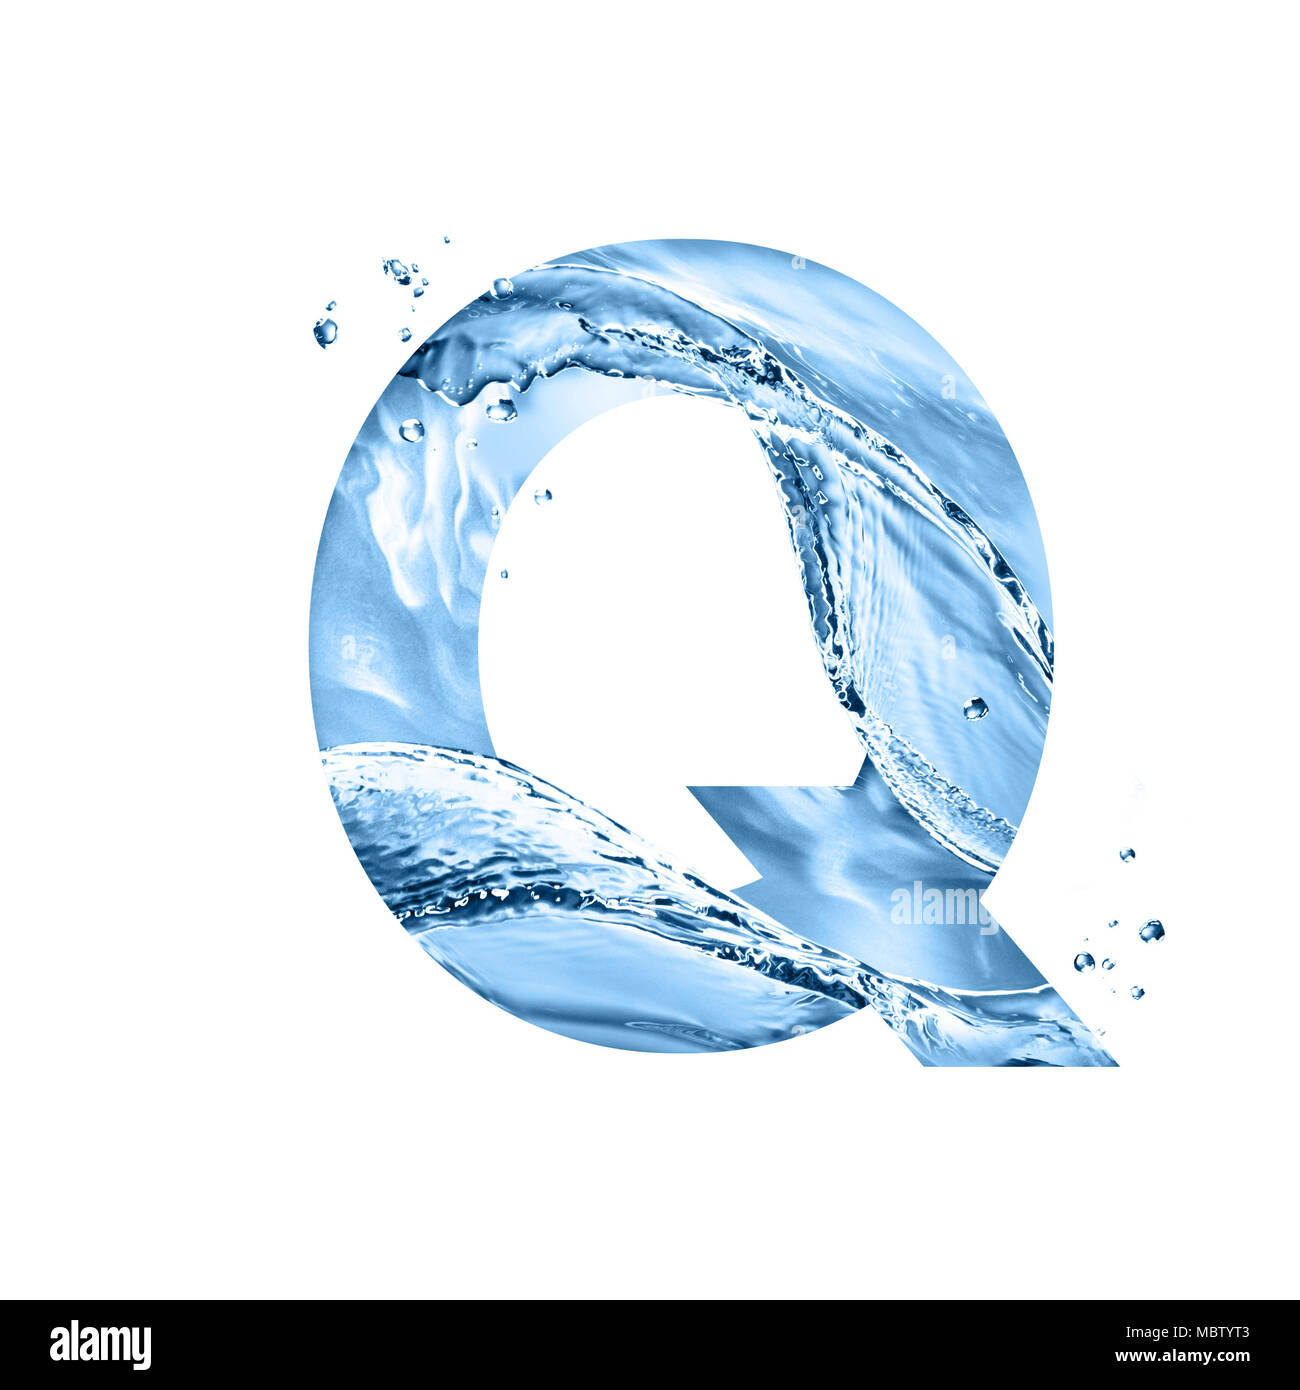 stylized font, art text made of water splashes, capital letter q, isolated on white background Stock Photo